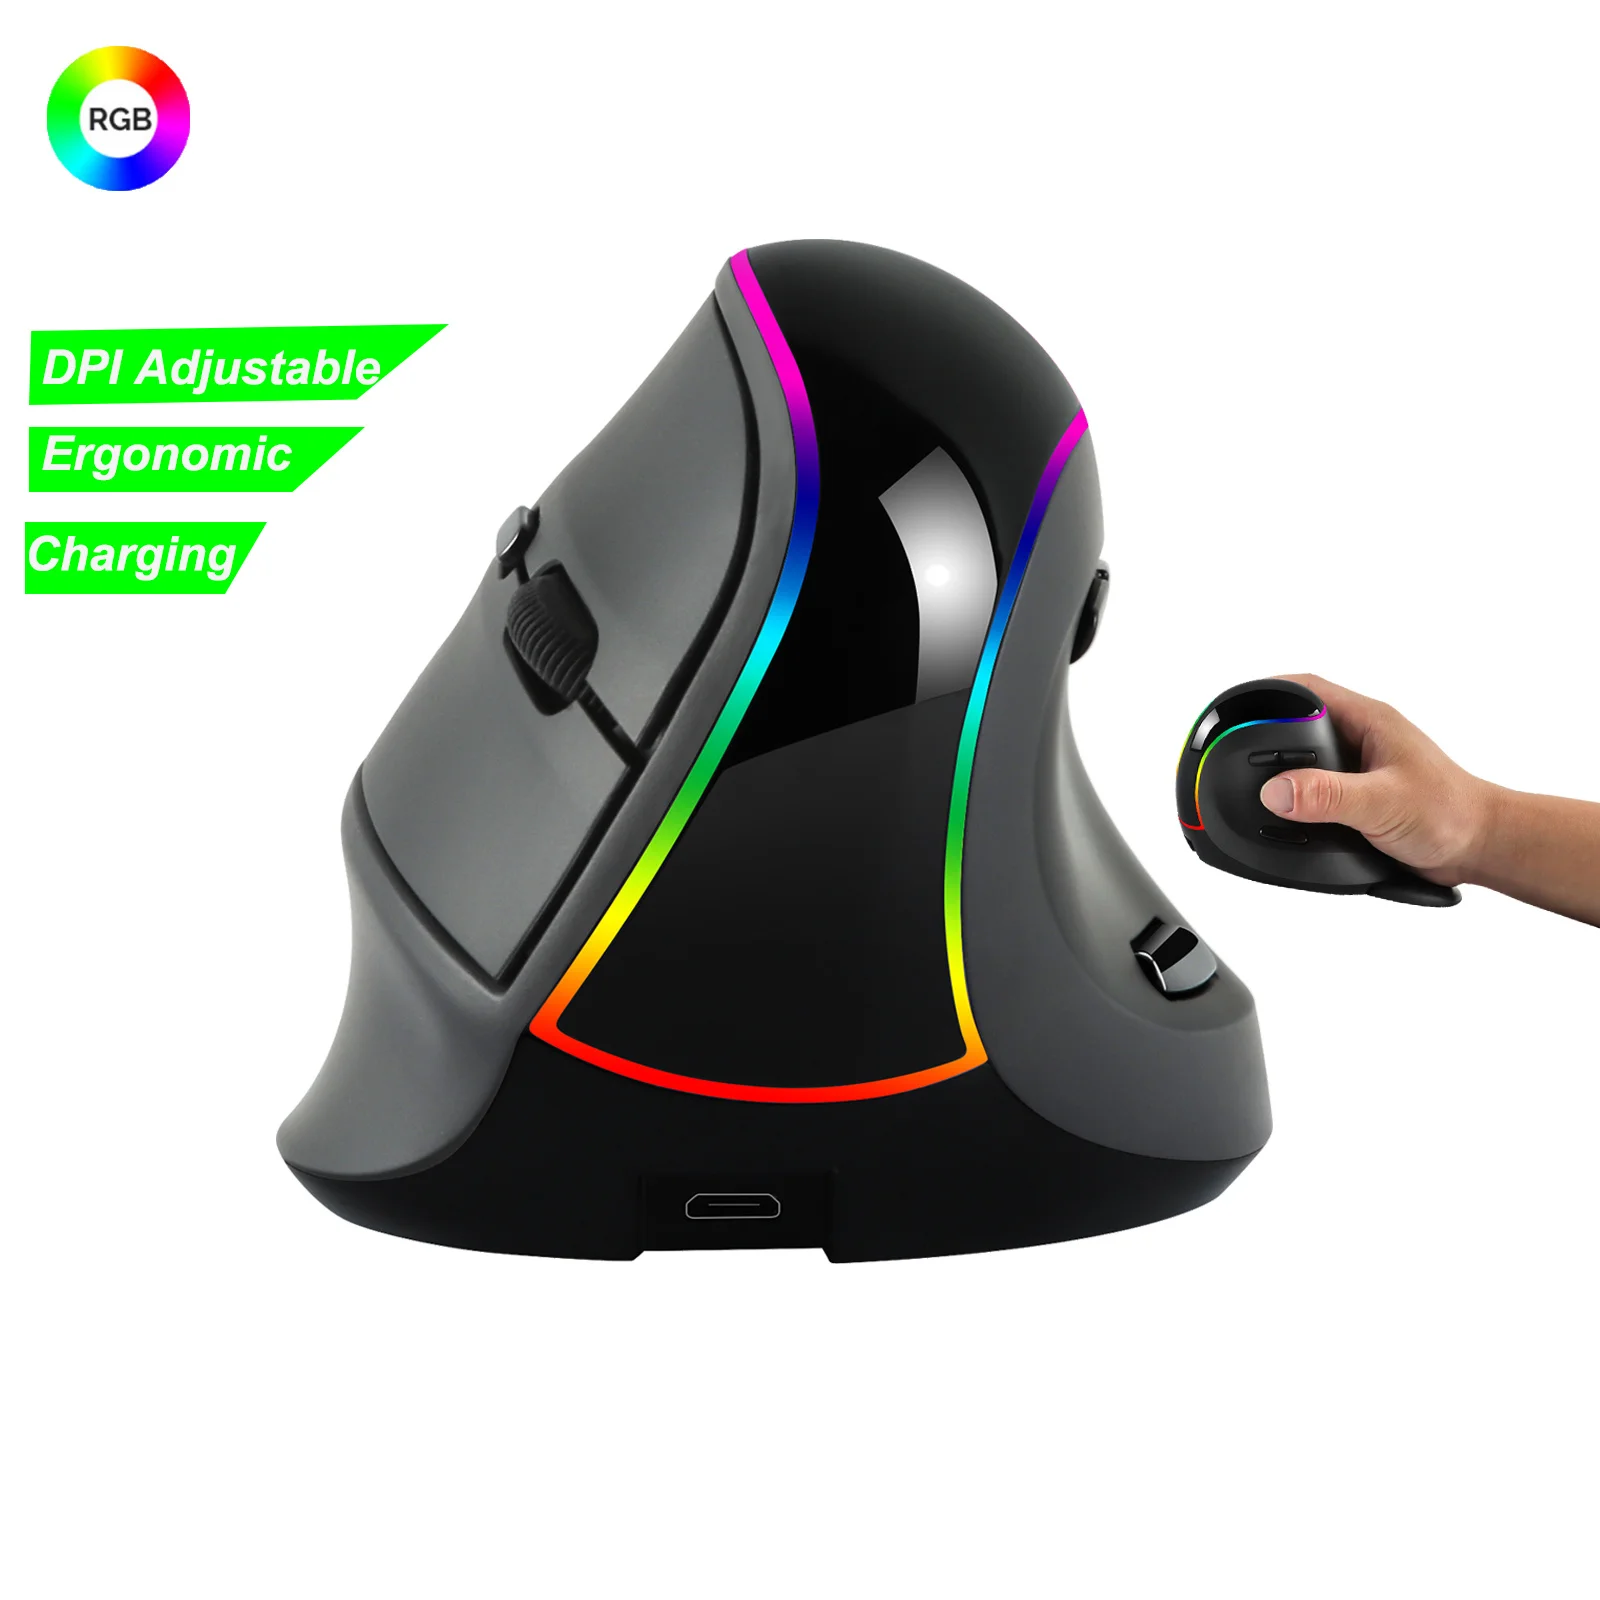 

Ergonomic Vertical Wireless Mouse RGB Rechargeable Computer Mice 2400DPI USB Optical Mause LED Backlit Gaming Mouse Mause For PC